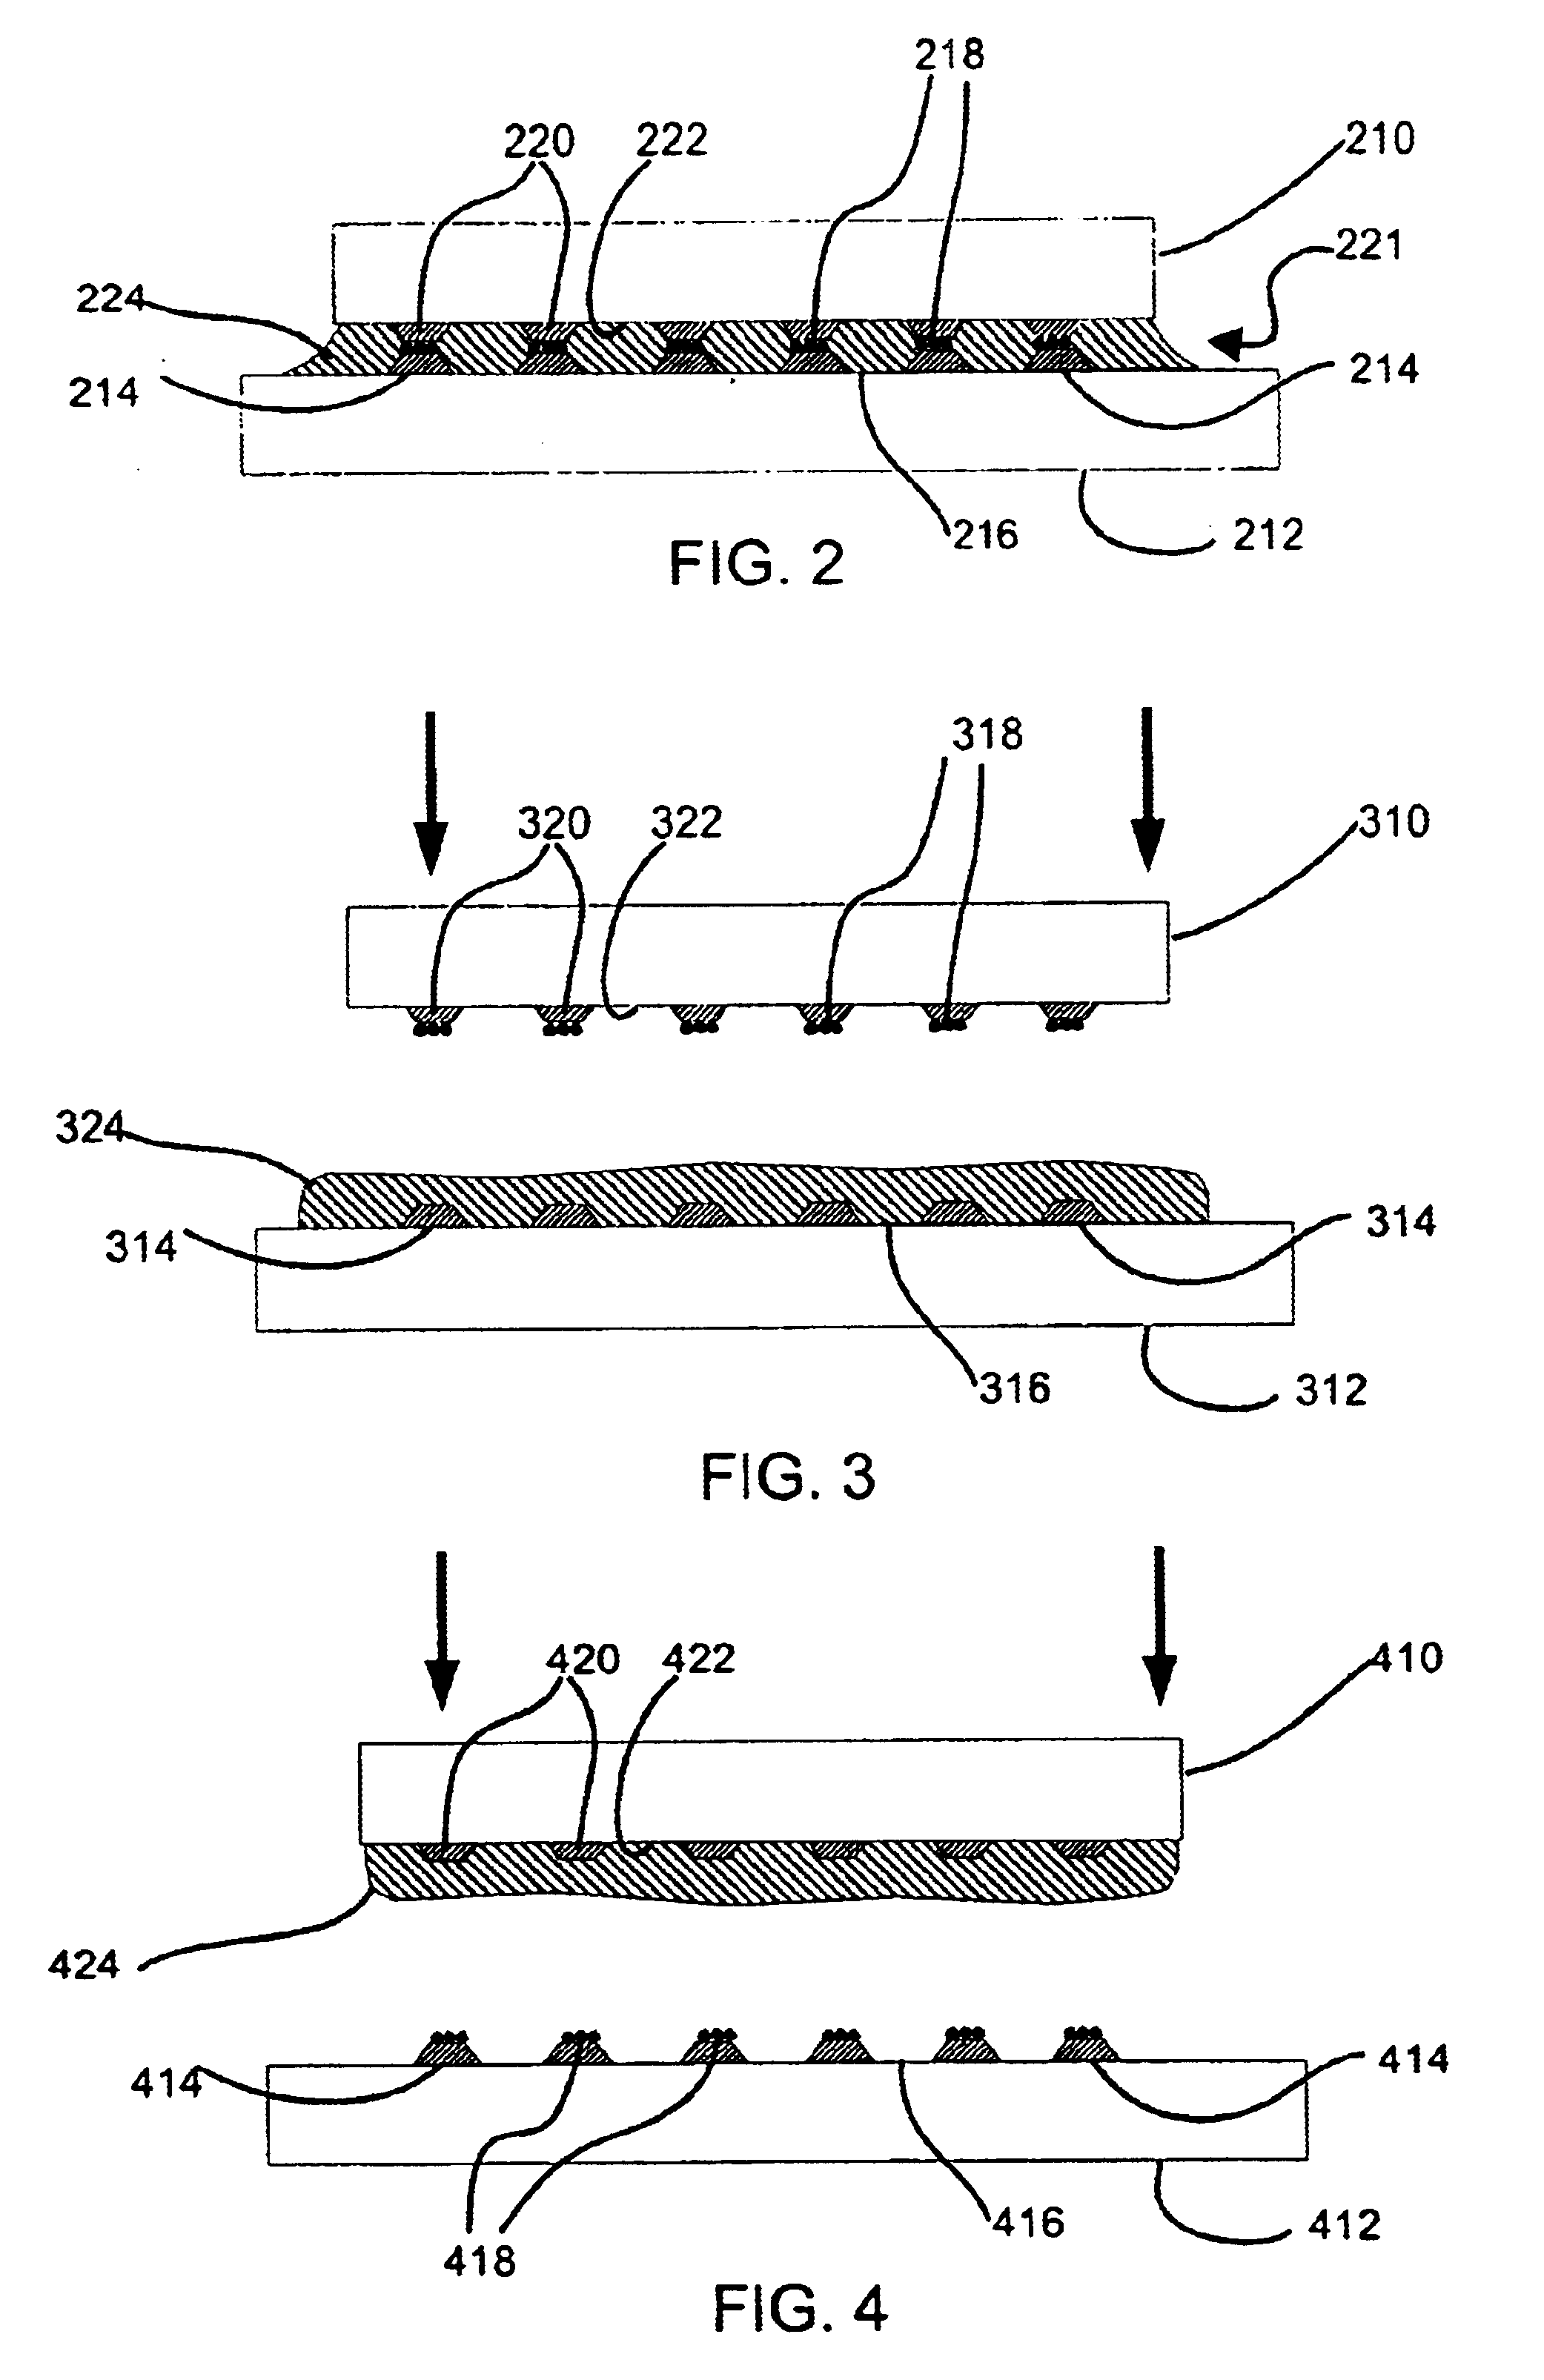 Component and antennae assembly in radio frequency identification devices